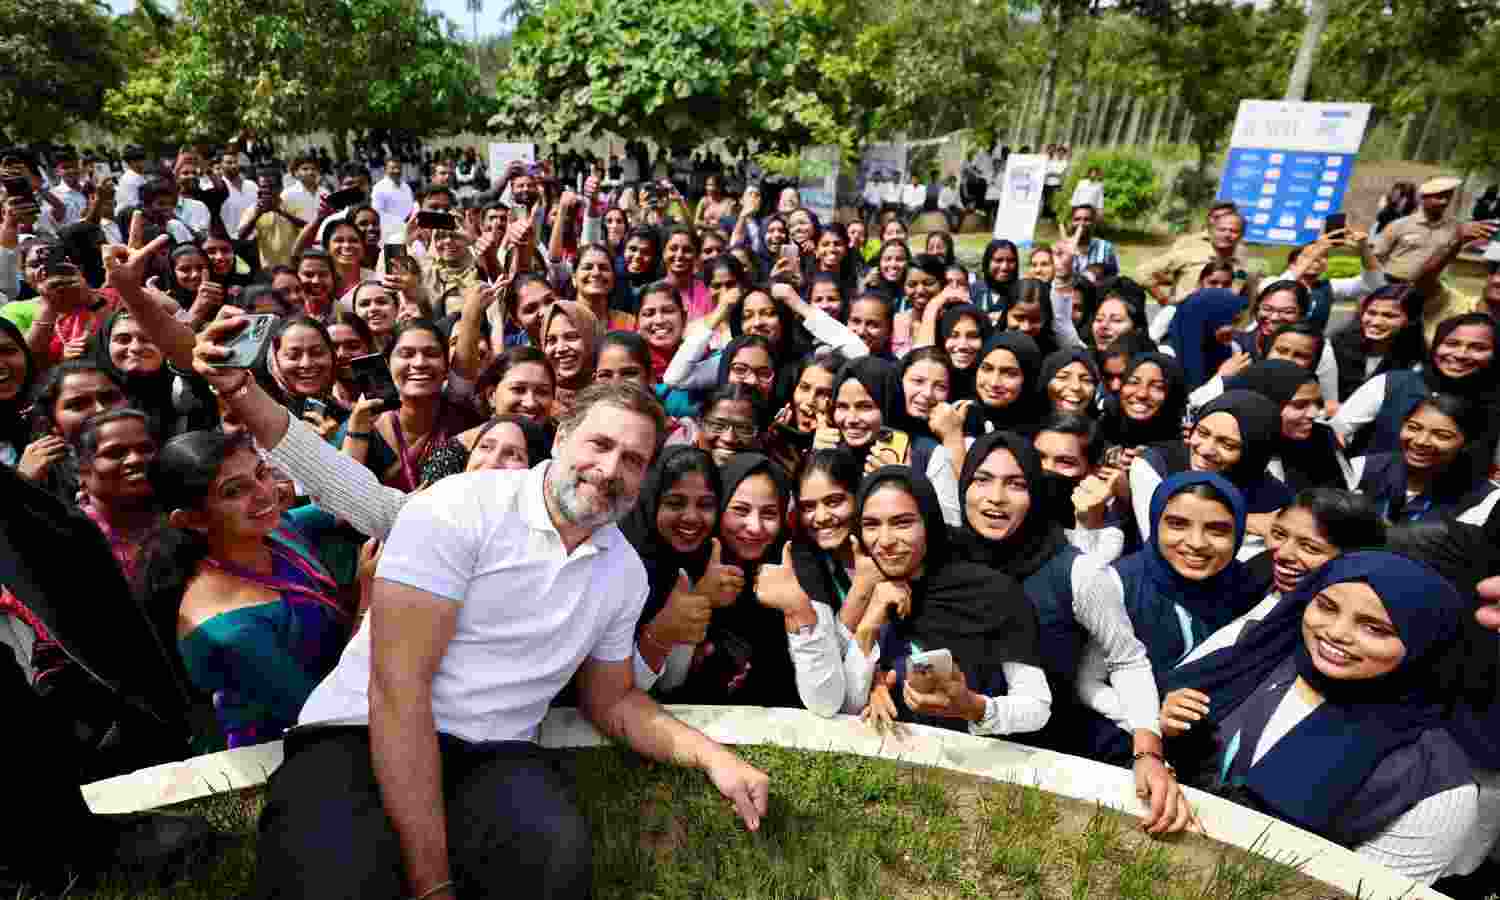 Open 'Mohabbat ki Dukaan' in every corner by defeating hatred: Rahul urges voters